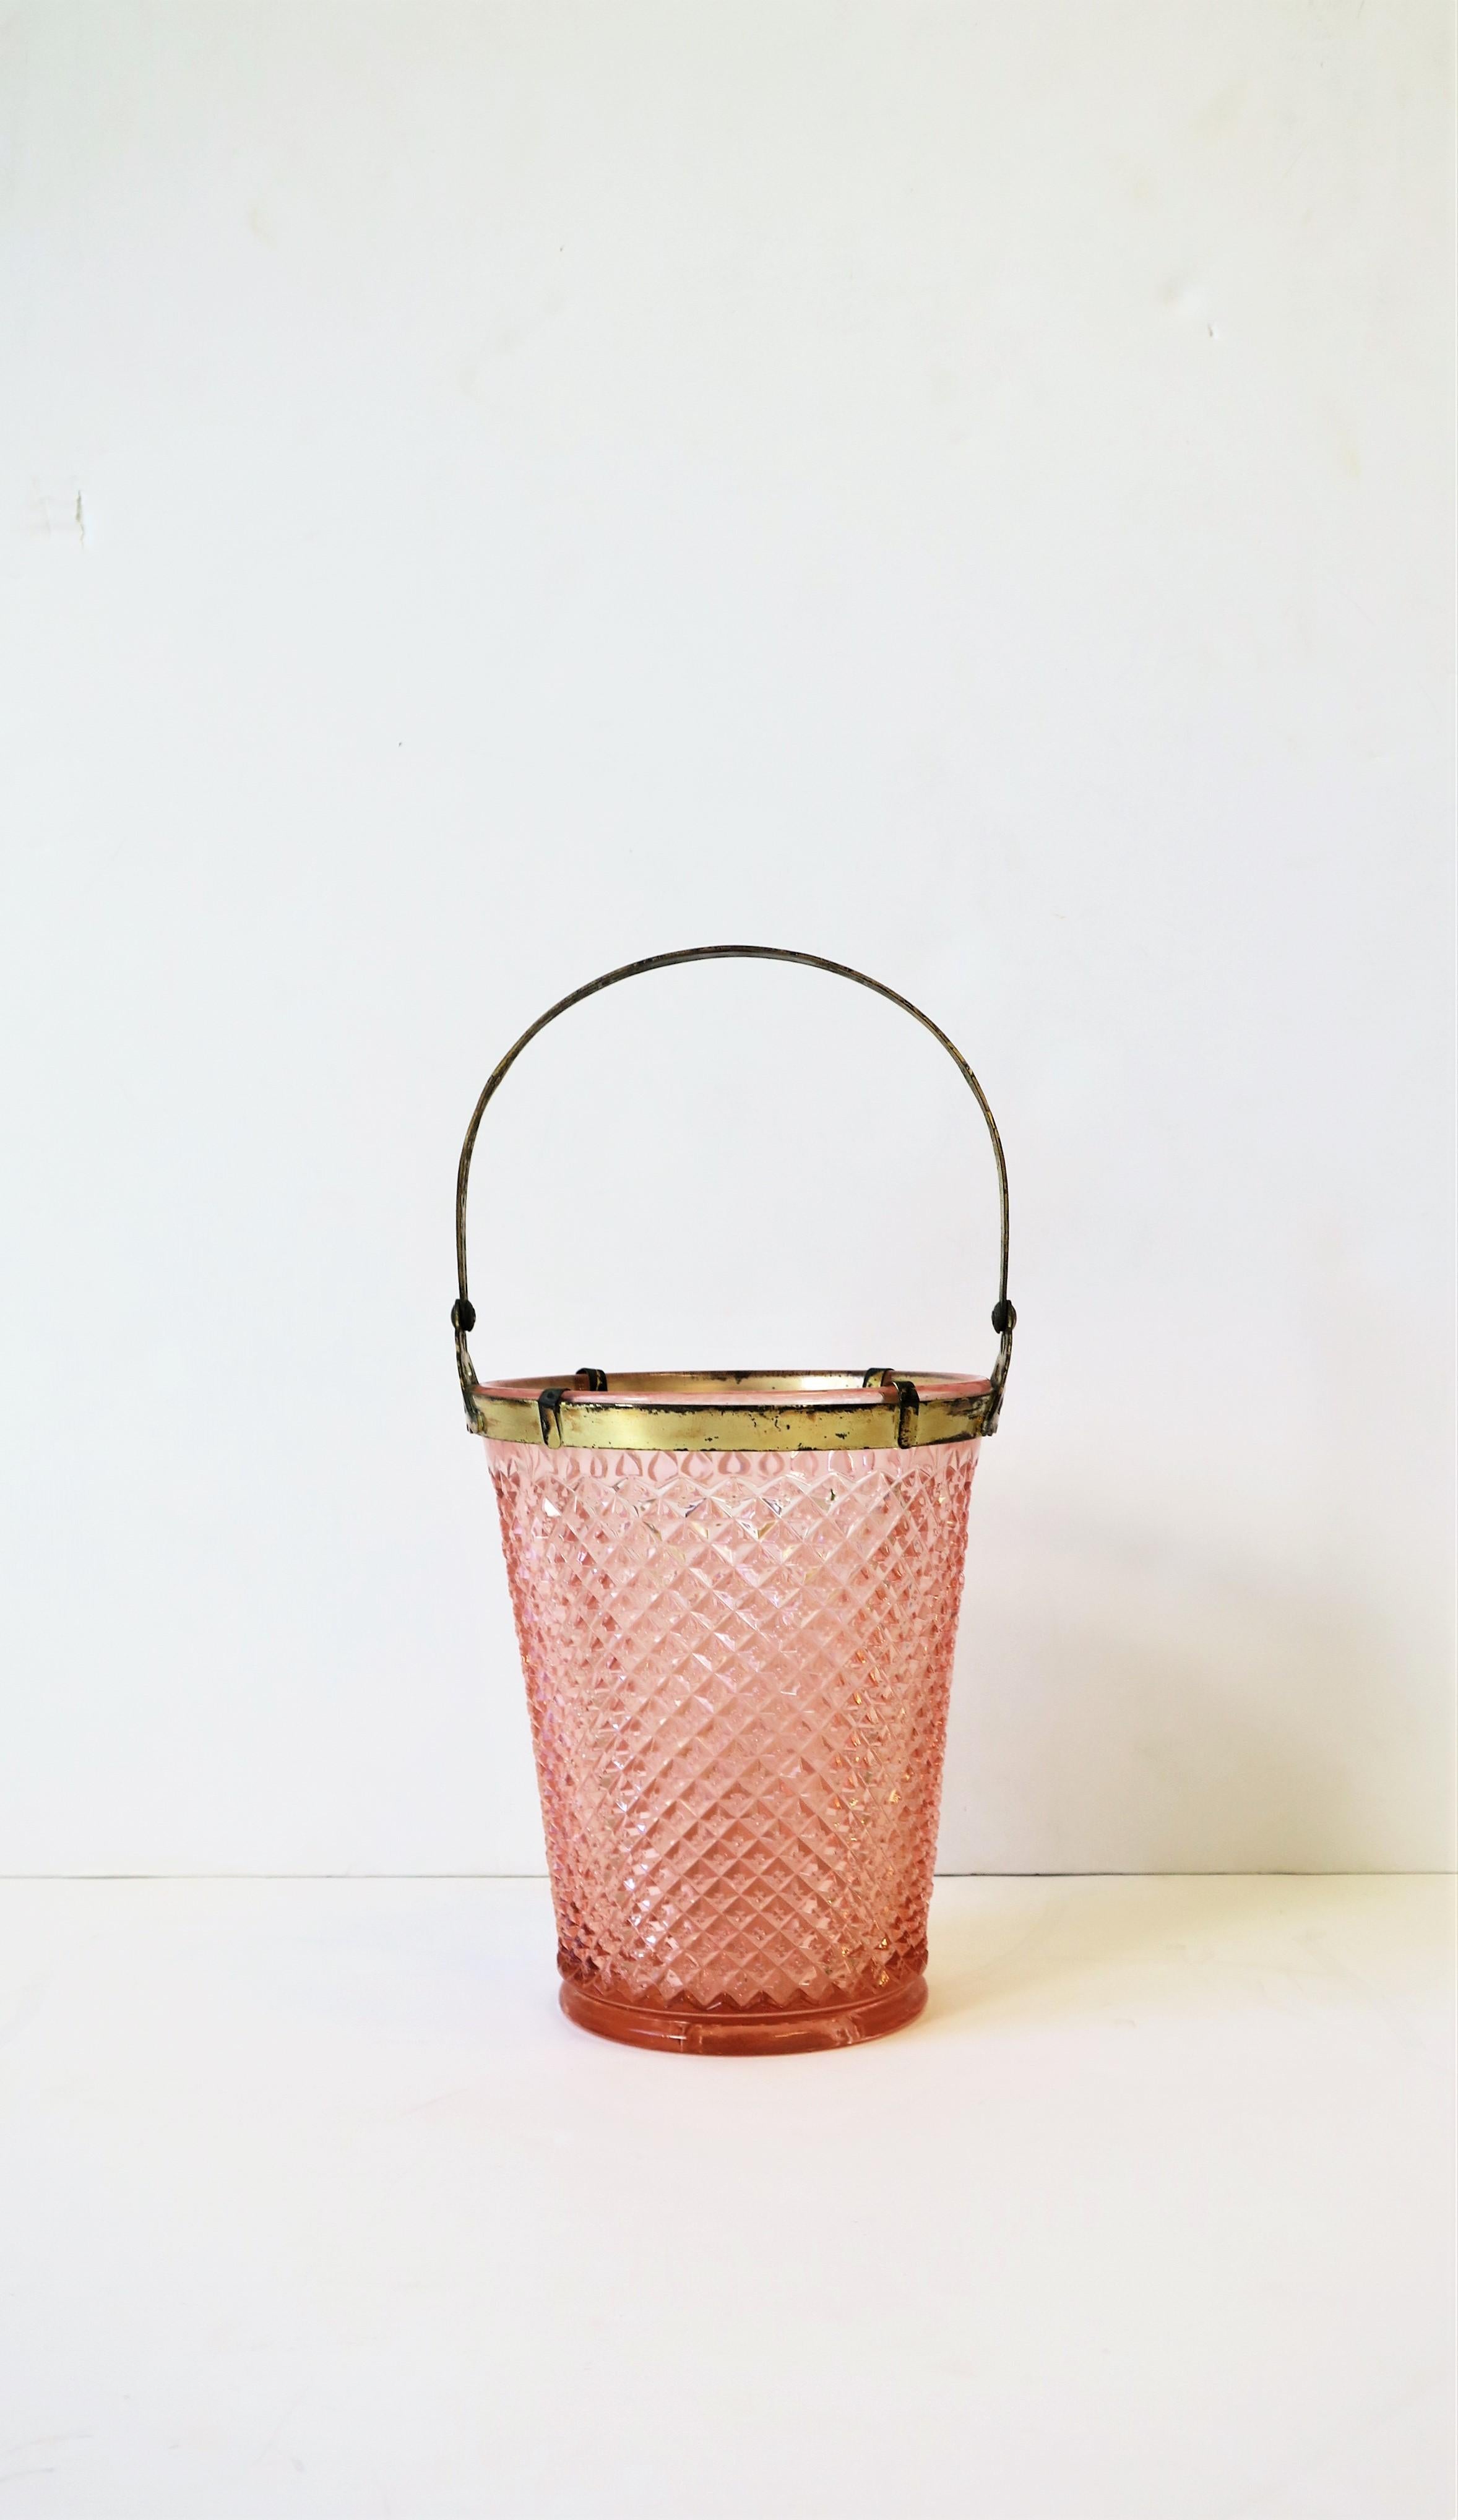 A beautiful early 20th century pink glass ice bucket with a gold-tone metal handle. Glass exterior has a perforated diamond-like design and a gold-tone metal detailed handle; handle is adjustable as show in images. A great addition to any bar, bar